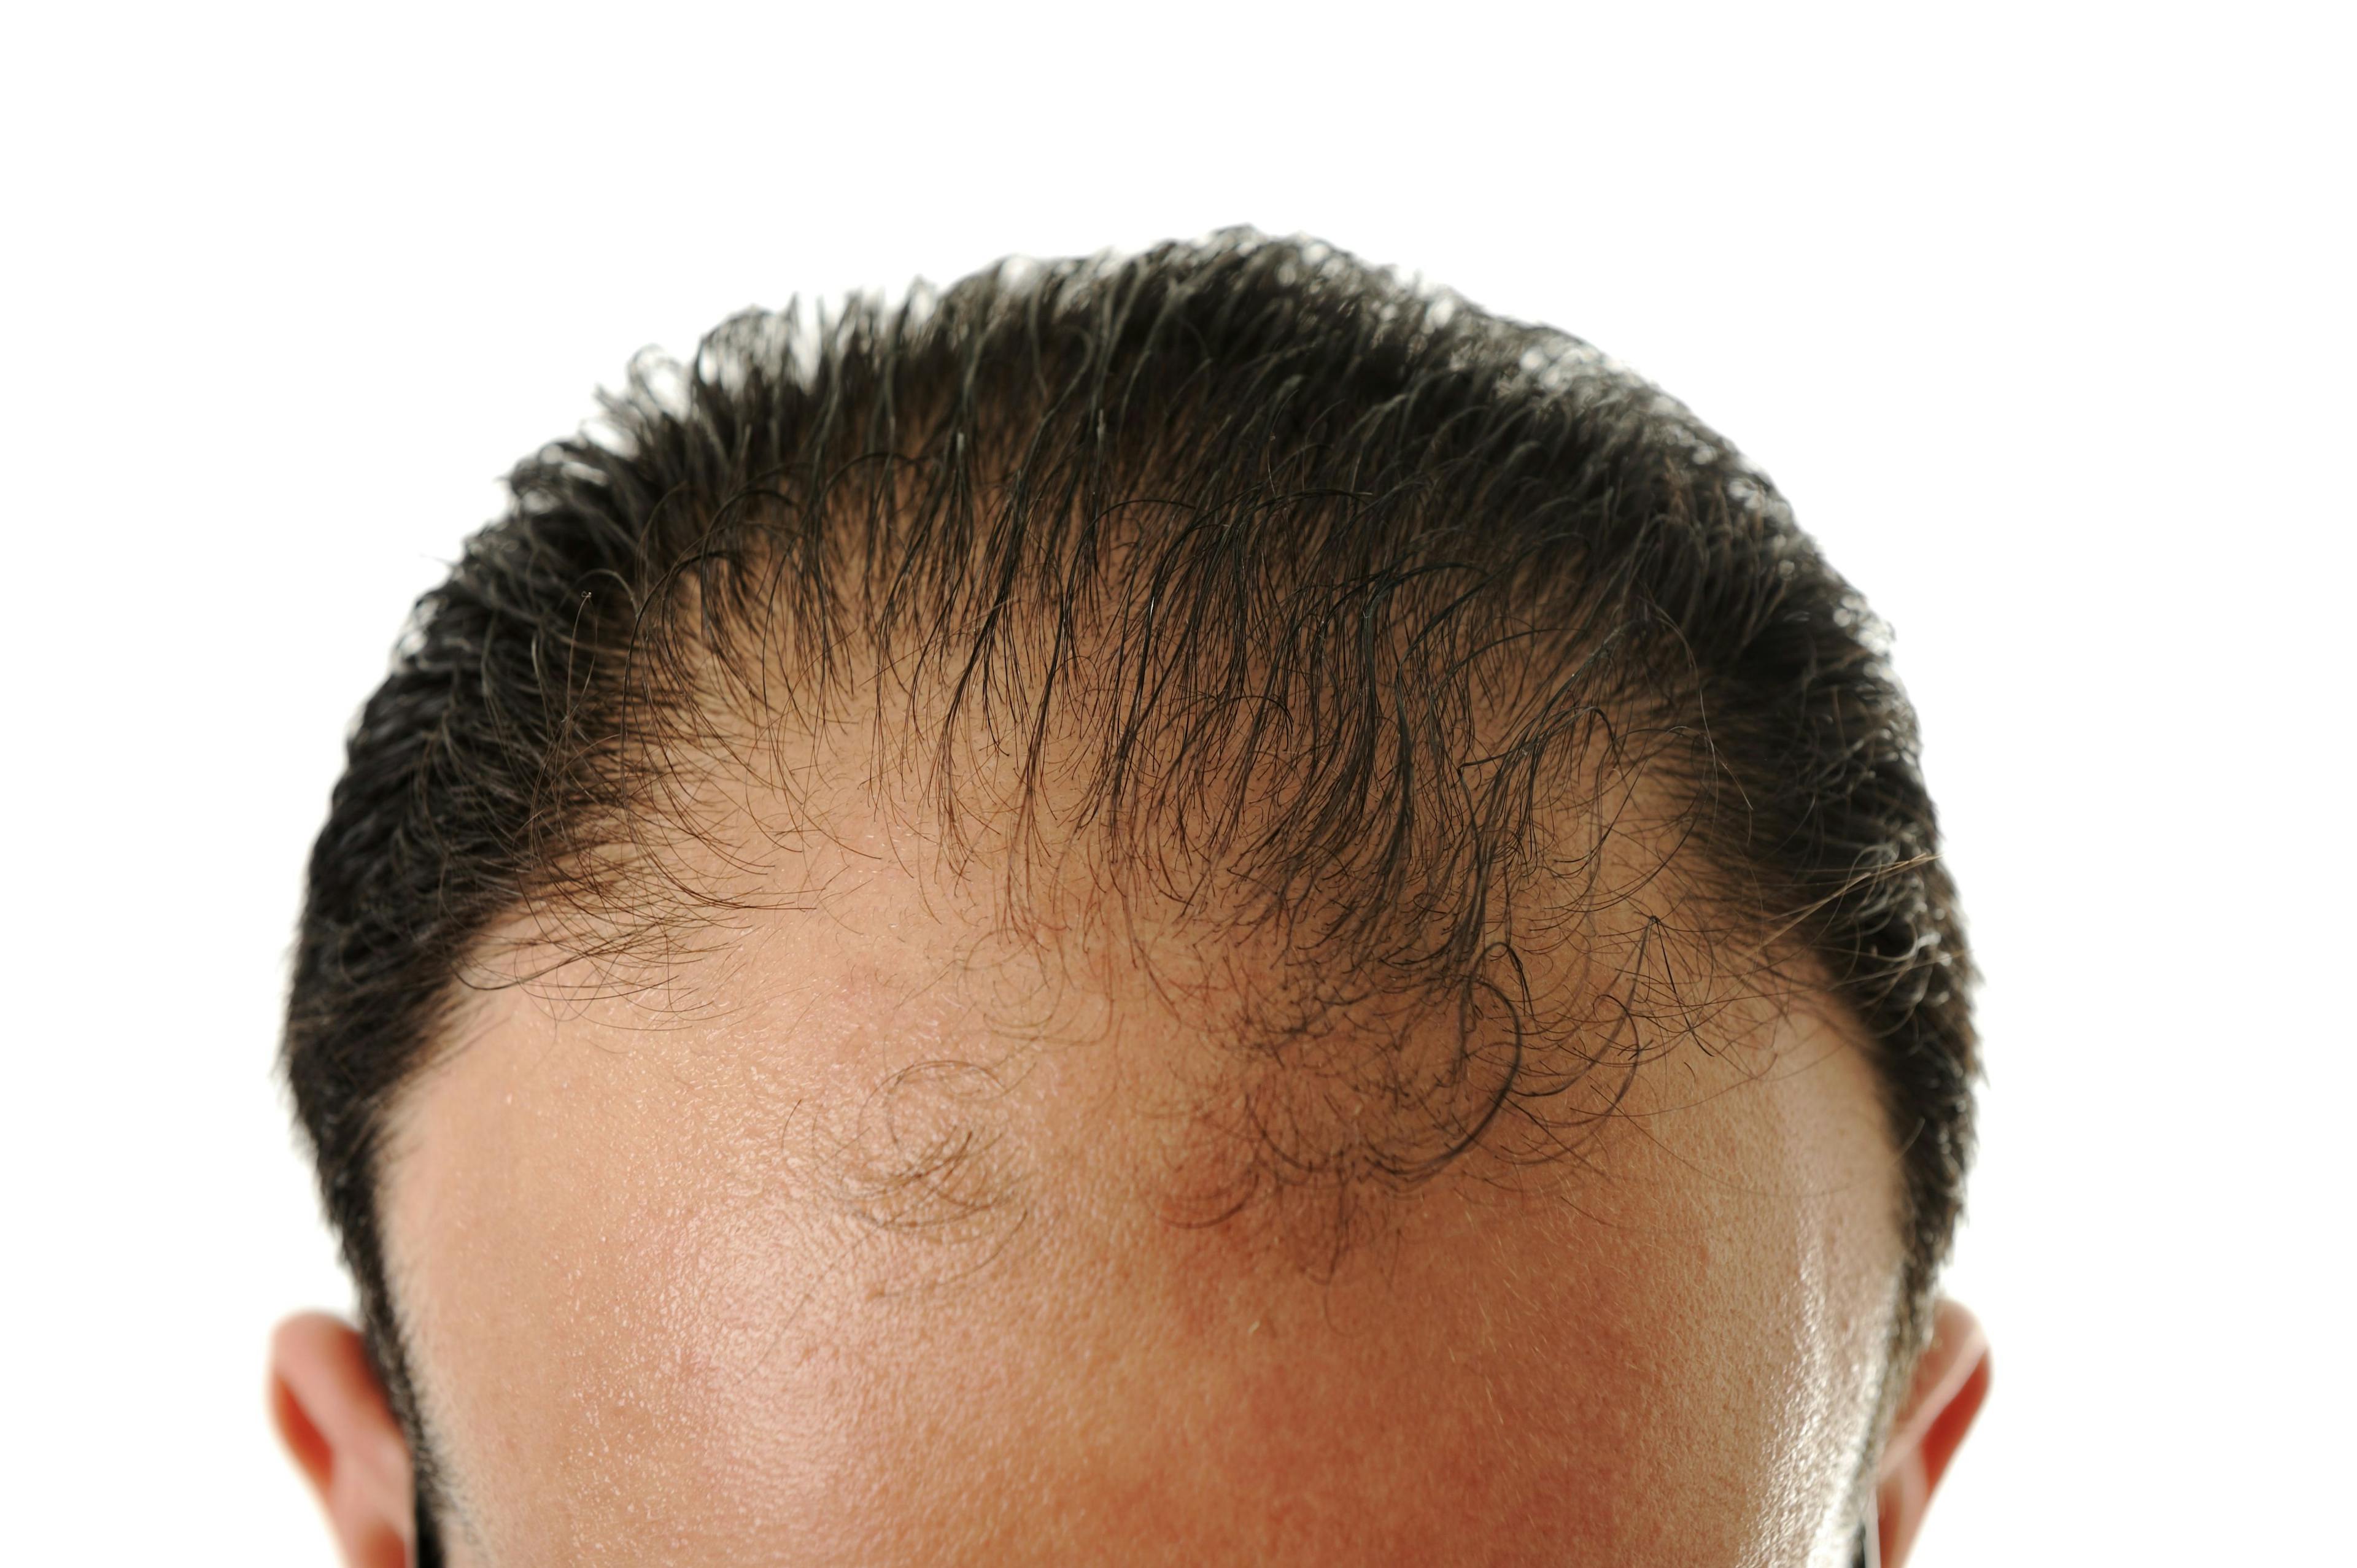 Pharmacists Play Crucial Role in Advising Patients With Androgenetic Alopecia